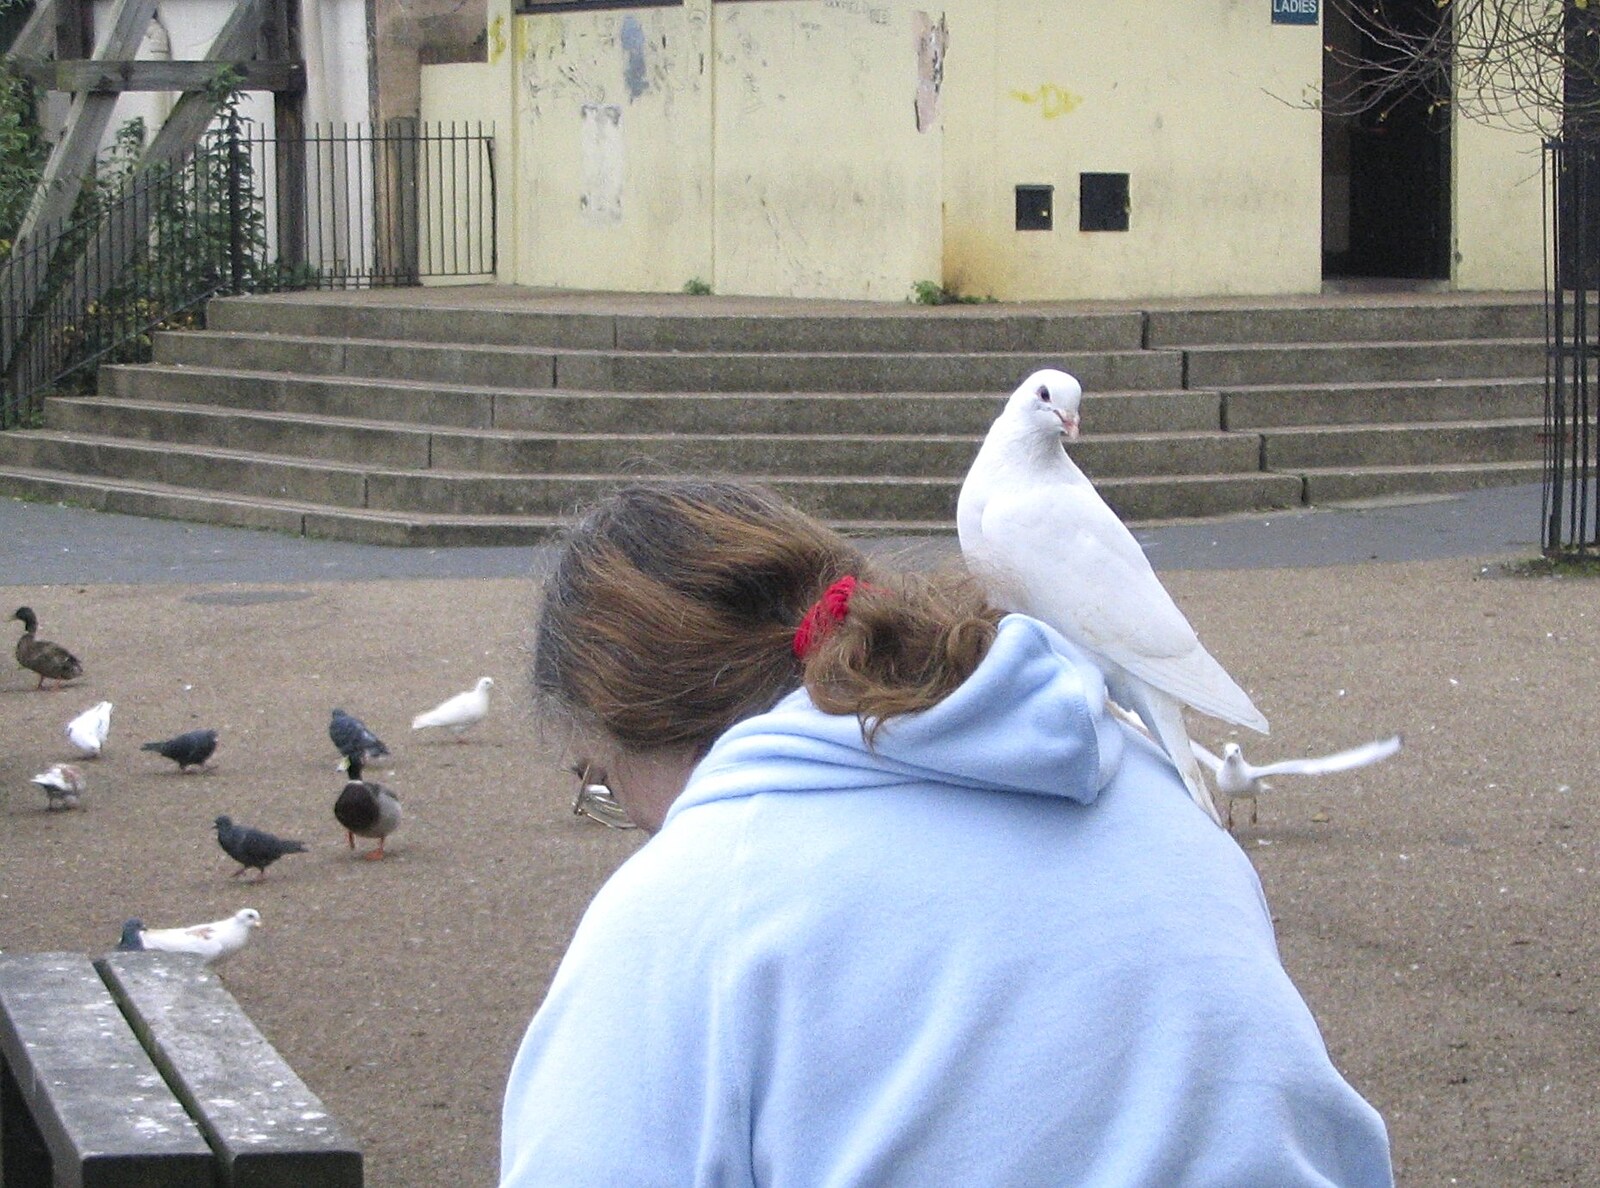 A dove on the head from Feeding the Ducks: a Diss and Norwich Miscellany - 7th November 2004